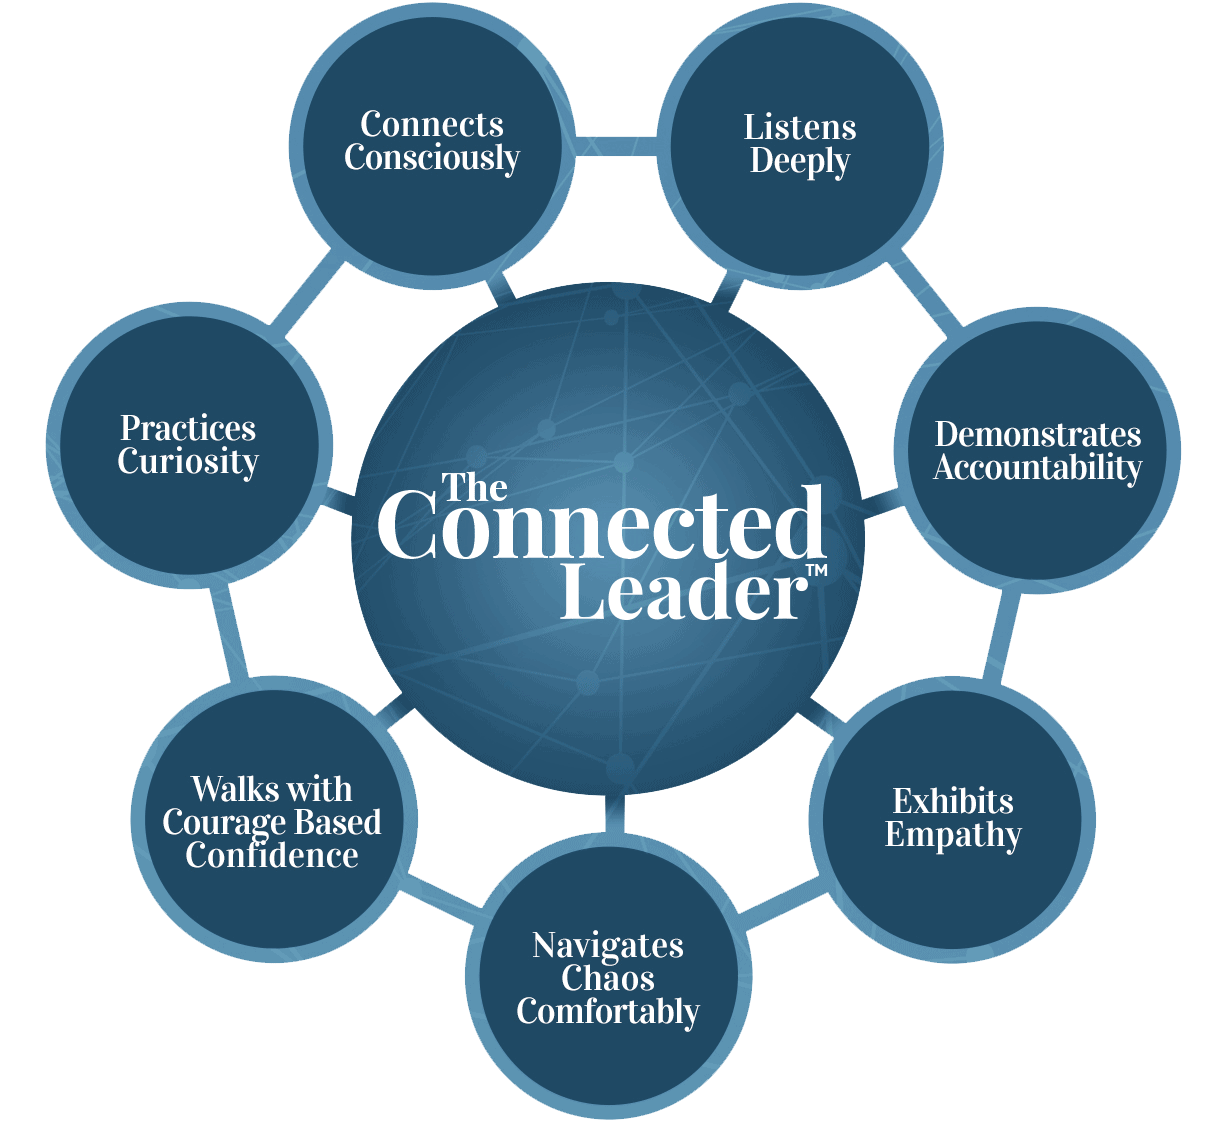 The Connected Leader diagram: Connect Consciously, Listen Deeply, Exhibit Empathy, Celebrate Curiosity, Demonstrate Accountability, Navigate Chaos Comfortably, and Walk With Courage-Based Confidence